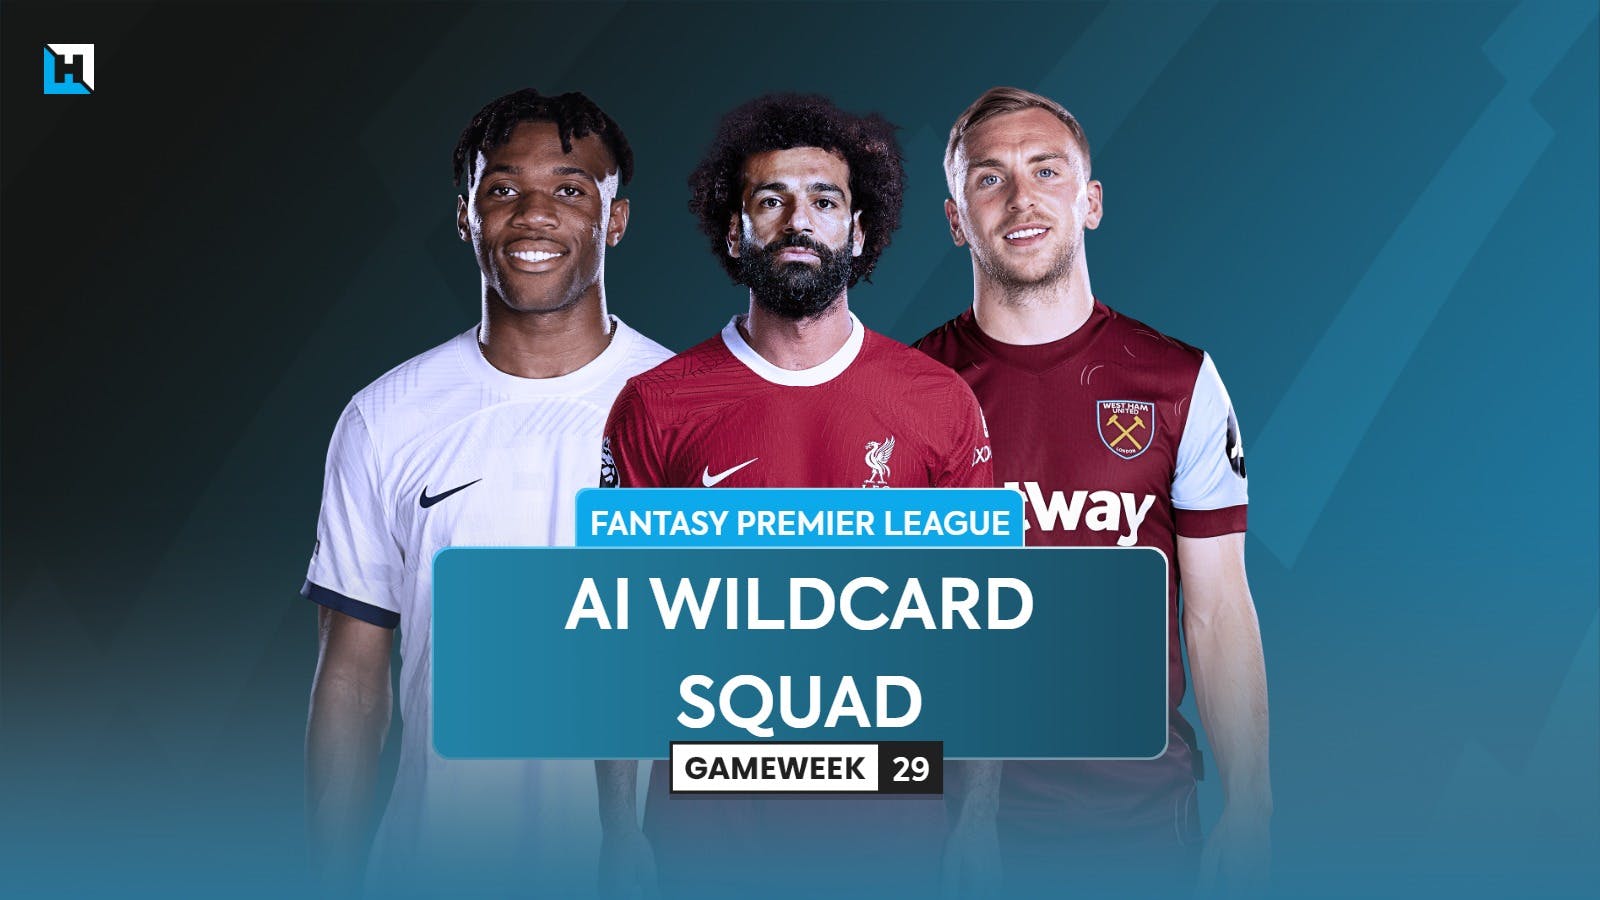 The best FPL Wildcard team for Blank Gameweek 29 according to AI